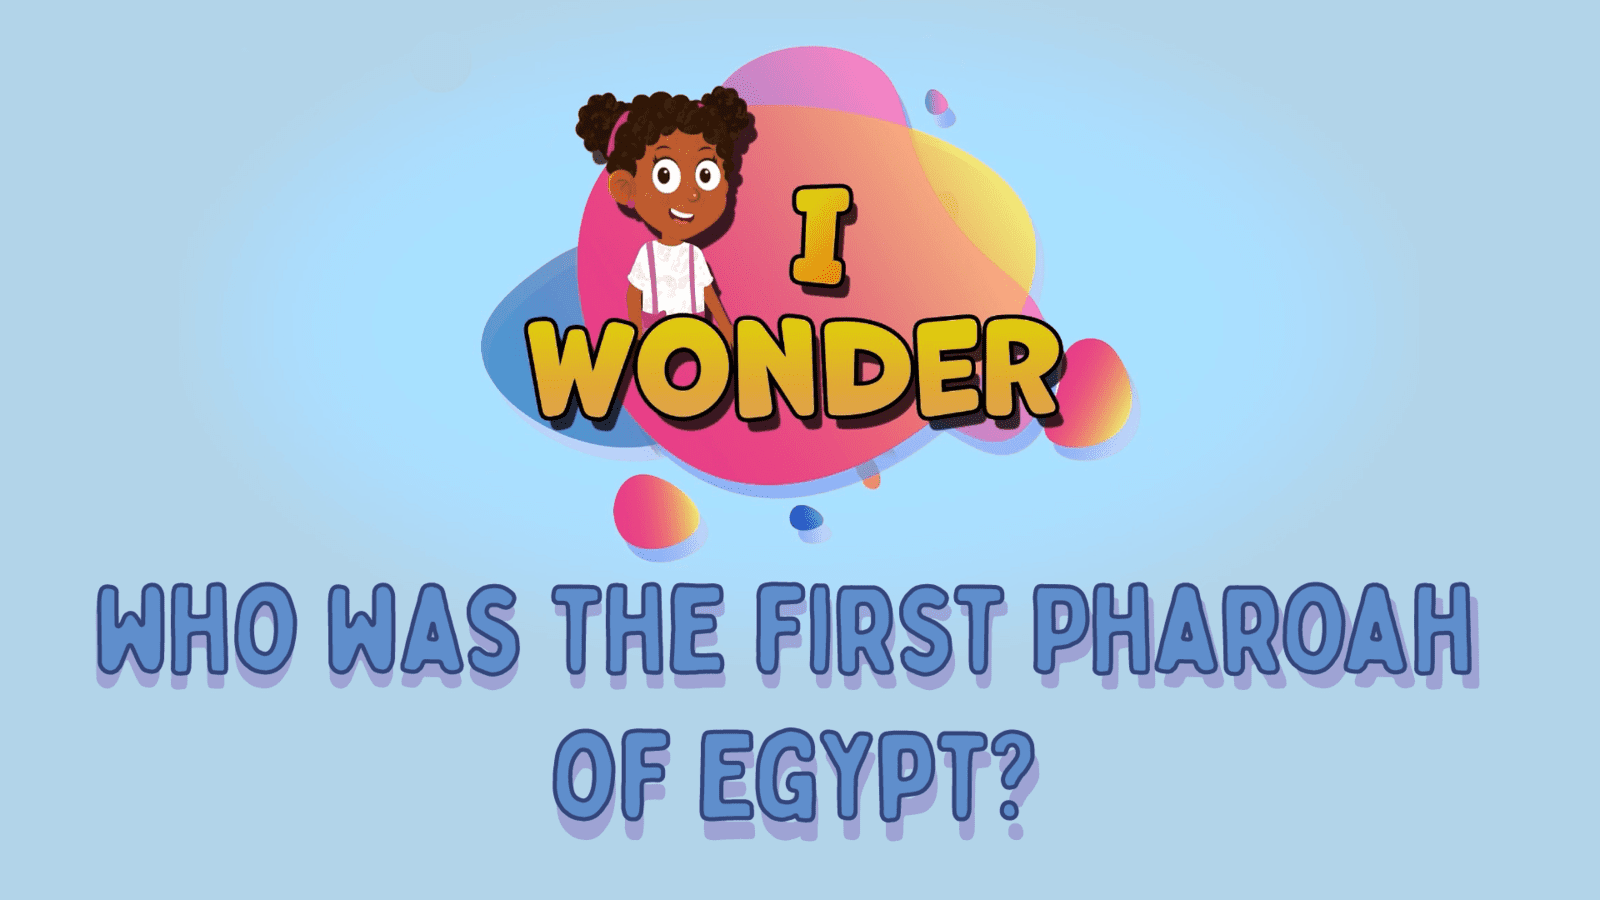 Who Was The First Pharaoh?